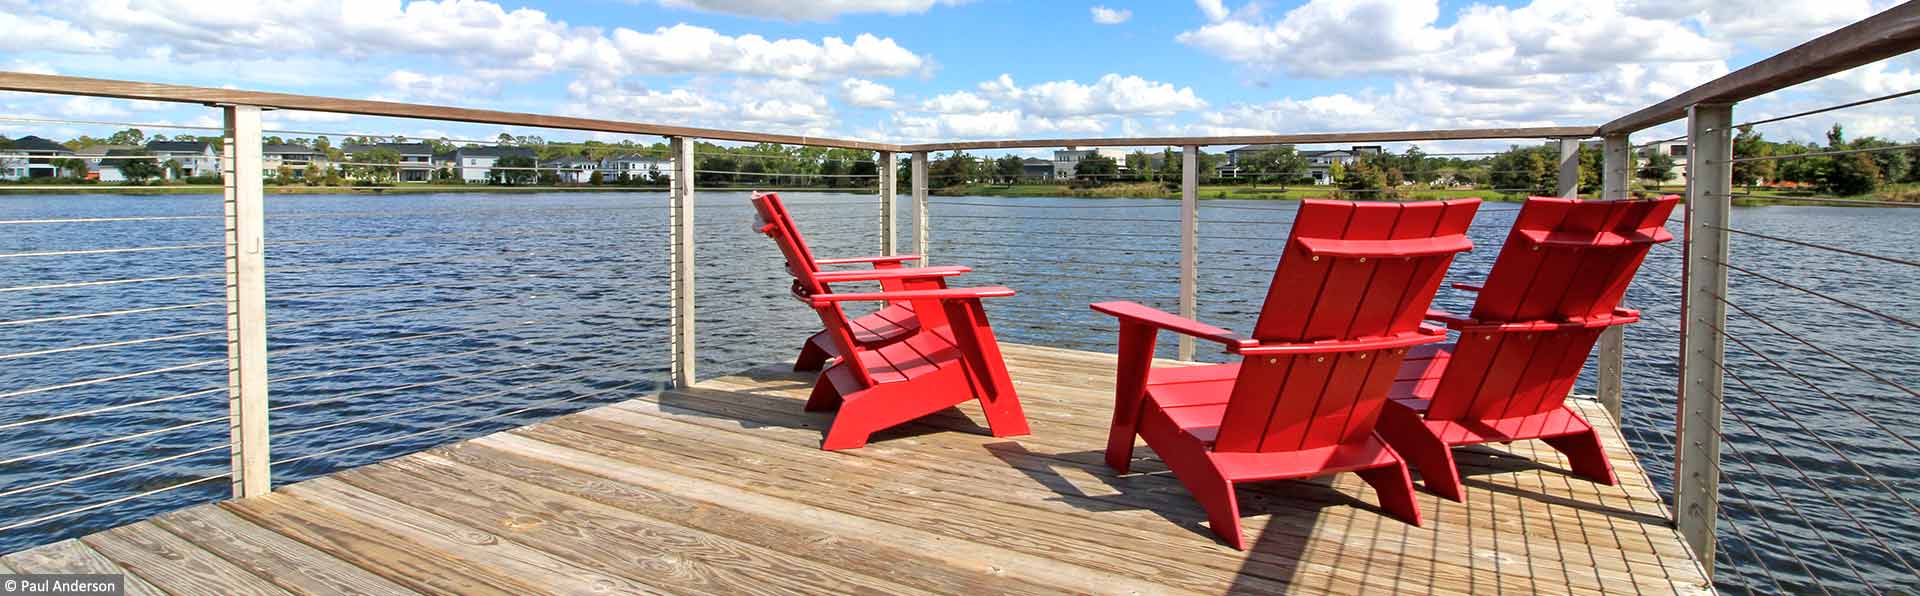 red chairs overlooking a lake in a pier